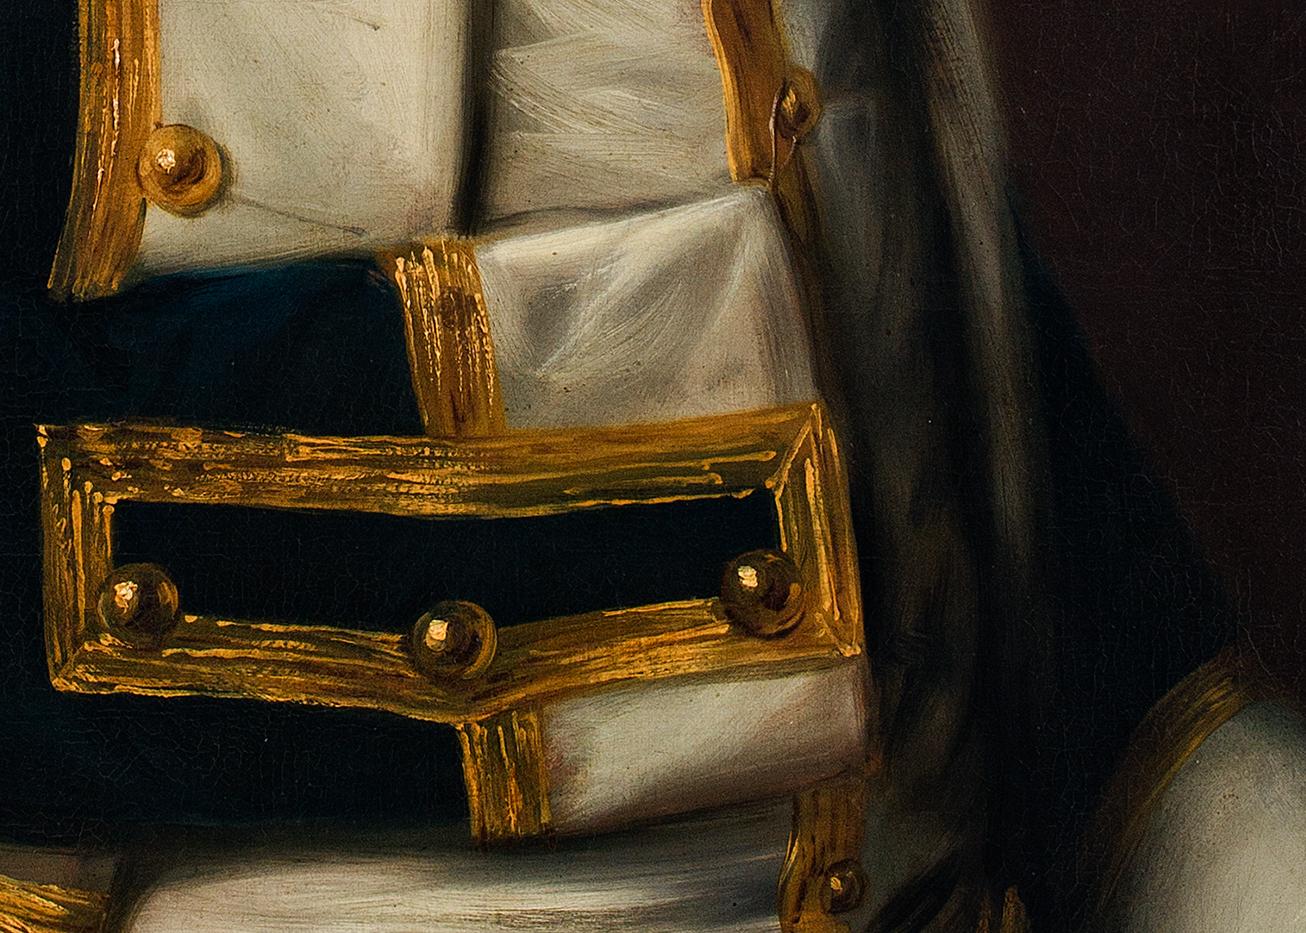 A close-up view of a painting of a naval officer with a missing arm, showing how the empty sleeve has been buttoned on to the commander's waistcoat